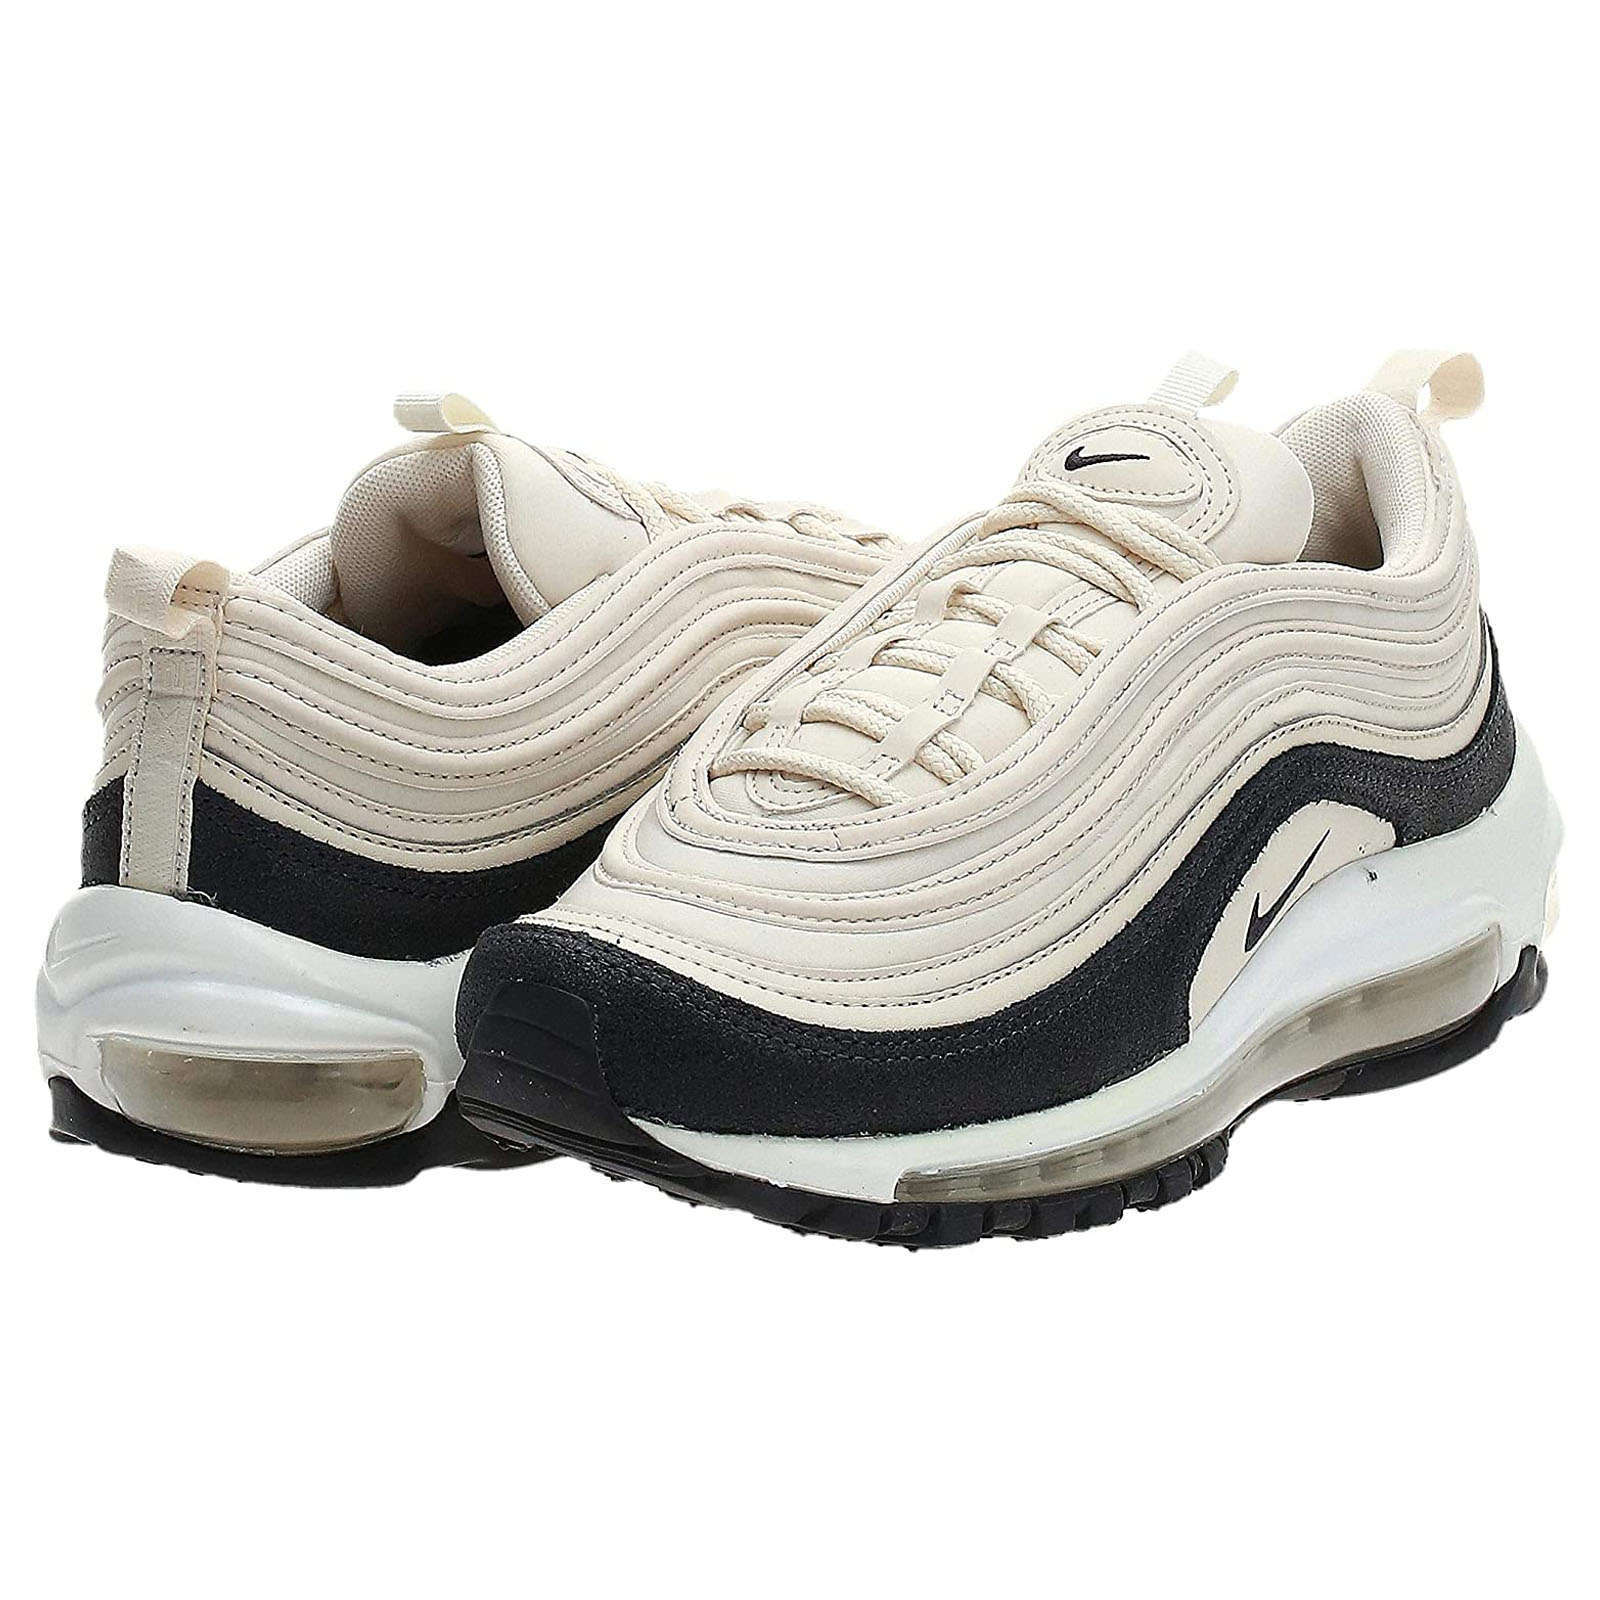 Nike Air Max 97 PRM Textile Leather Synthetic Women's Low-Top Trainers#color_light cream oil grey